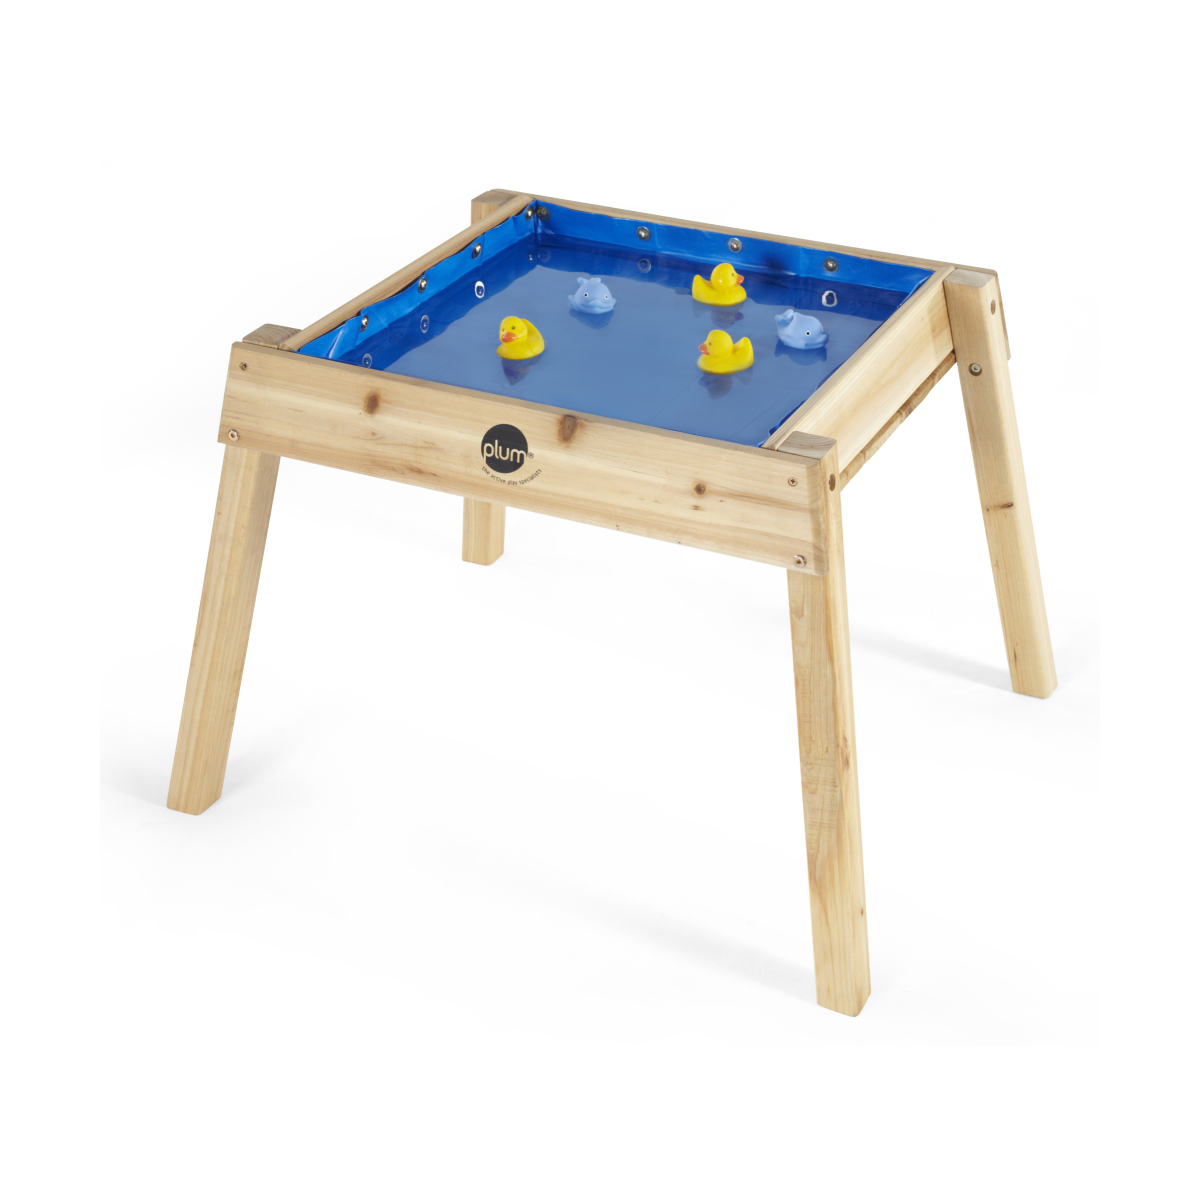 Plum Play Build & Splash Wooden Sand and Water Table